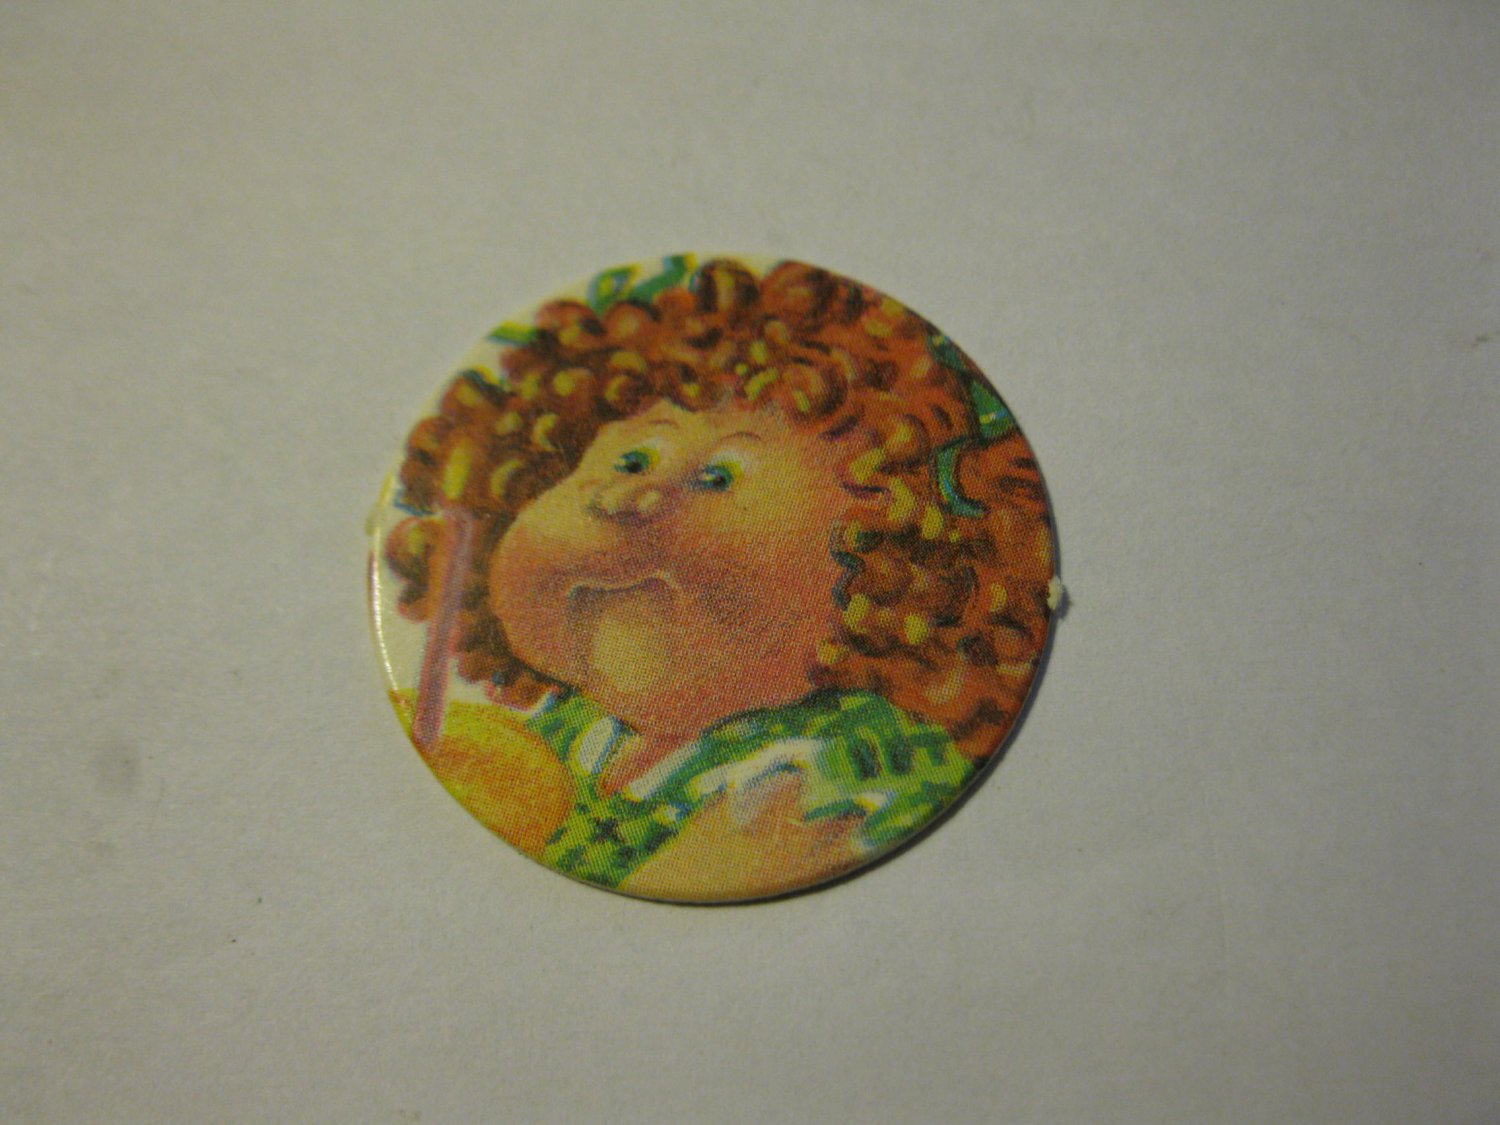 1984 Cabbage Patch Kids Board Game Piece: Red Headed round chip